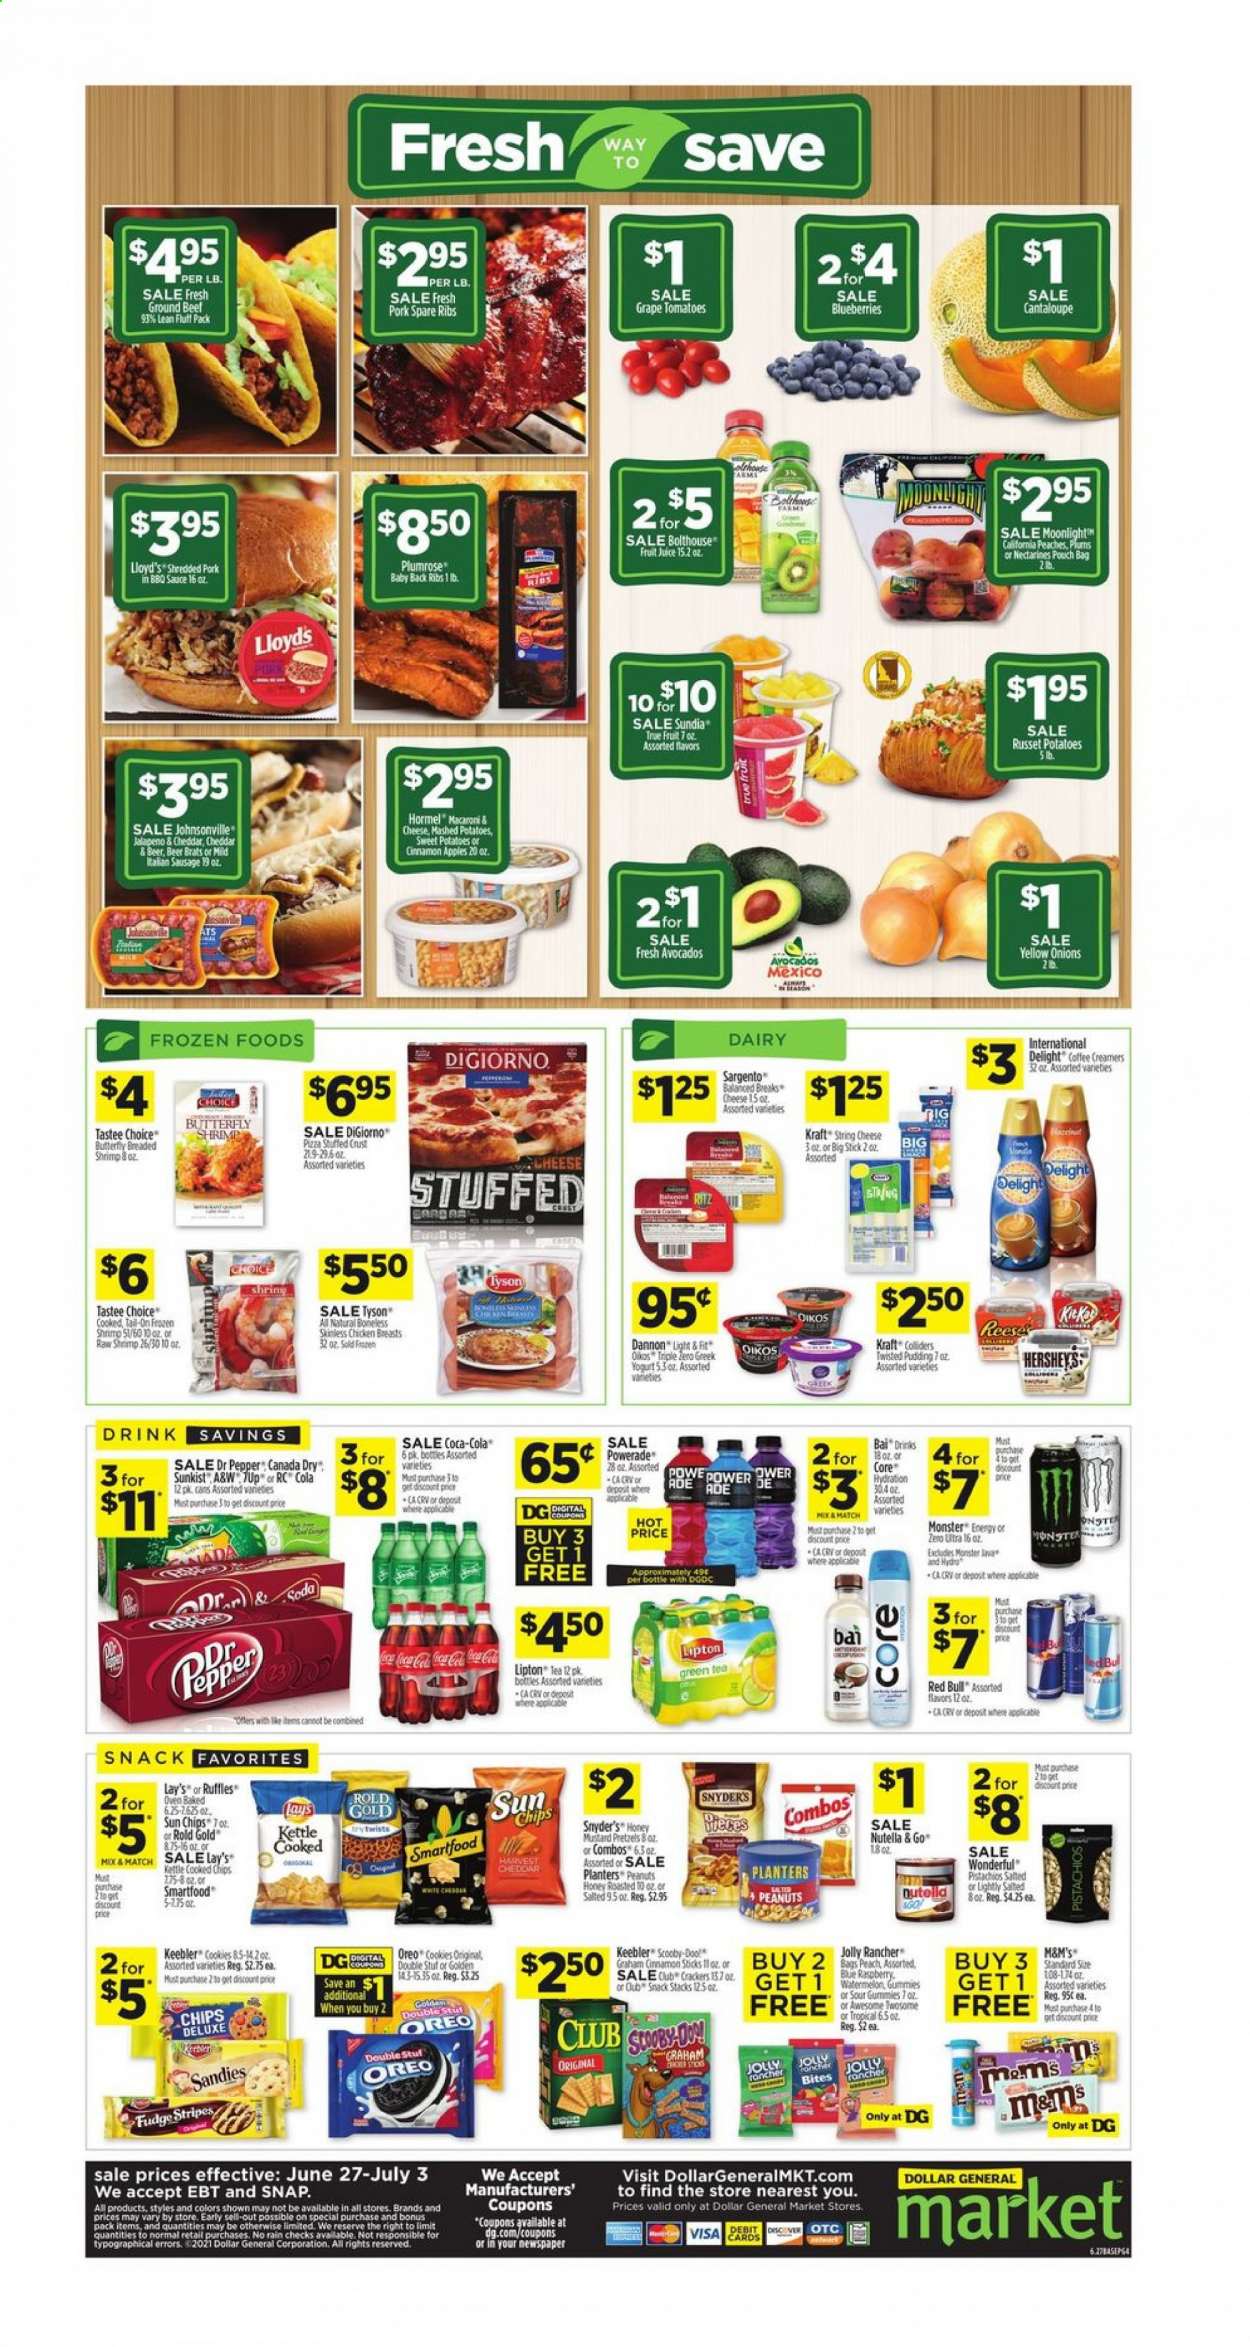 thumbnail - Dollar General Flyer - 06/27/2021 - 07/03/2021 - Sales products - pretzels, cantaloupe, russet potatoes, sweet potato, tomatoes, onion, jalapeño, apples, avocado, blueberries, shrimps, mashed potatoes, sauce, Kraft®, Hormel, Johnsonville, sausage, string cheese, cheese, Sargento, greek yoghurt, pudding, Oreo, yoghurt, Oikos, Dannon, Hershey's, cookies, fudge, Nutella, snack, M&M's, Keebler, Lay’s, Smartfood, cinnamon, mustard, honey mustard, peanuts, pistachios, Planters, Canada Dry, Coca-Cola, Powerade, juice, fruit juice, Monster, Lipton, Dr. Pepper, Red Bull, A&W, Bai, soda, green tea, tea, coffee, beer, beef meat, ground beef, pork meat, pork ribs, pork spare ribs, pork back ribs, kettle, nectarines, peaches. Page 4.